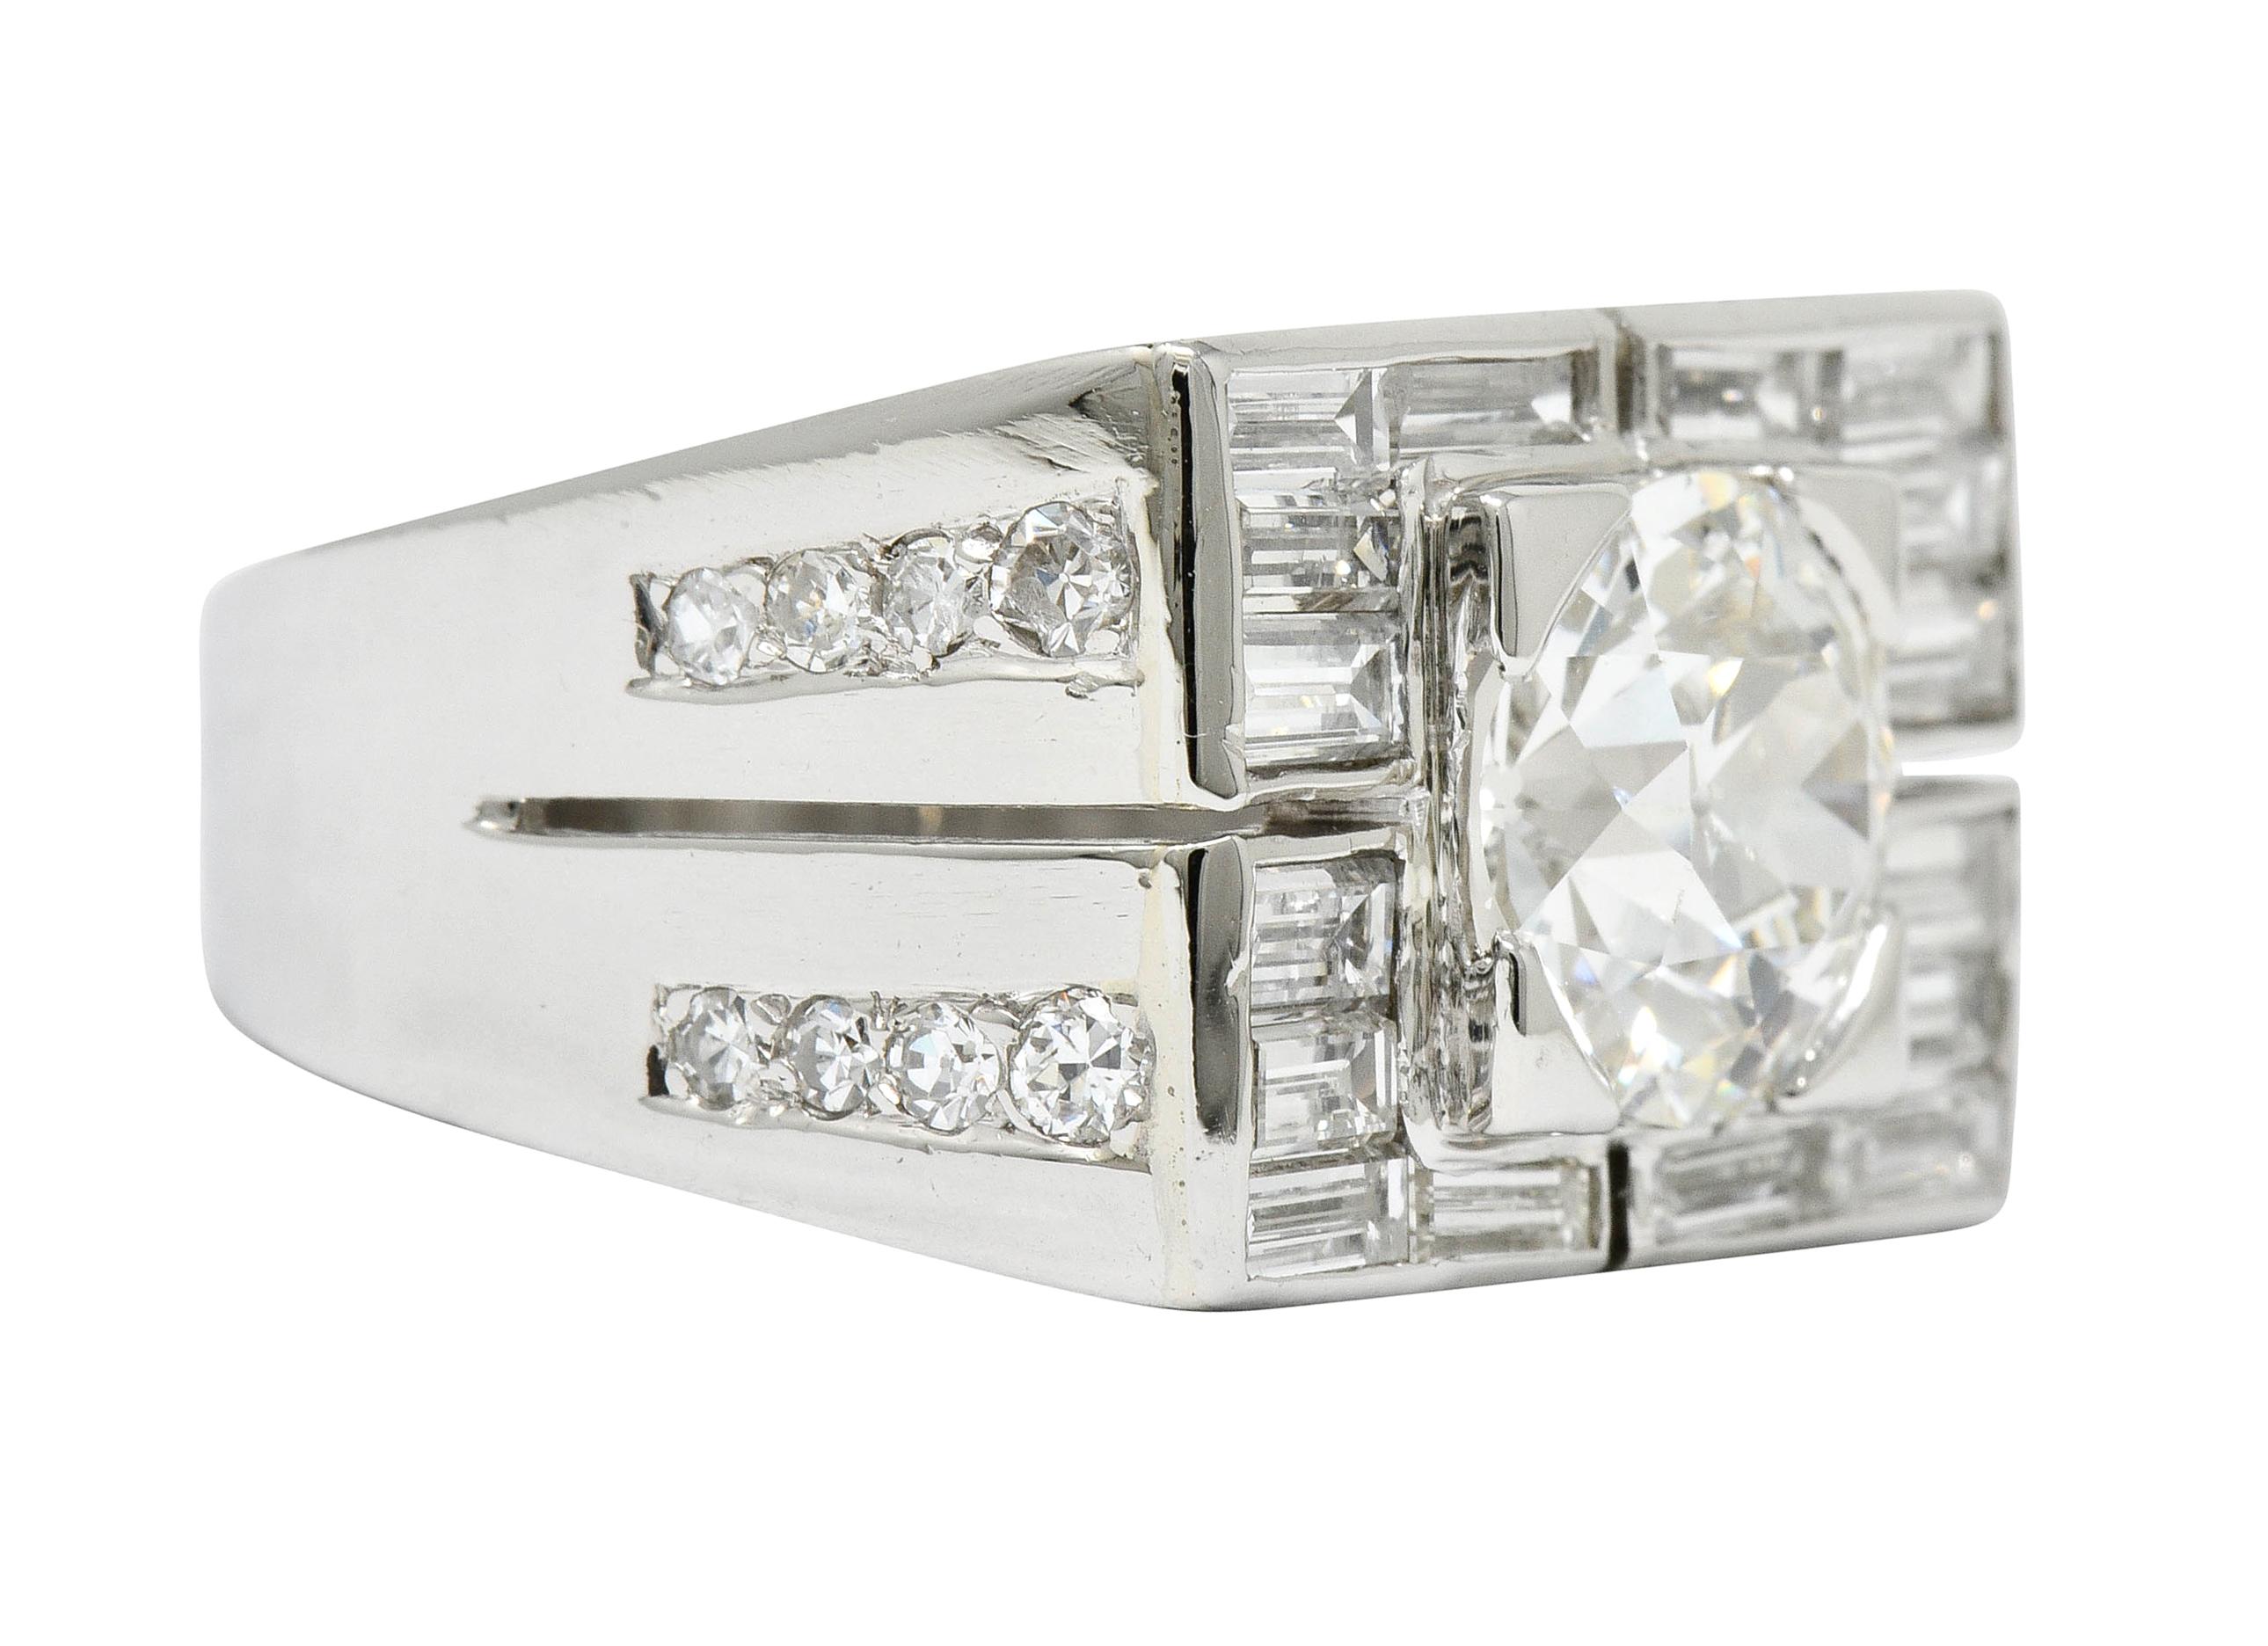 Centering a transitional cut diamond weighing approximately 2.34 carats, J color with VS1 clarity

Set in a low square form head in a rectangular mounting channel set with baguette cut diamonds weighing approximately 1.45 carats total; G/H color